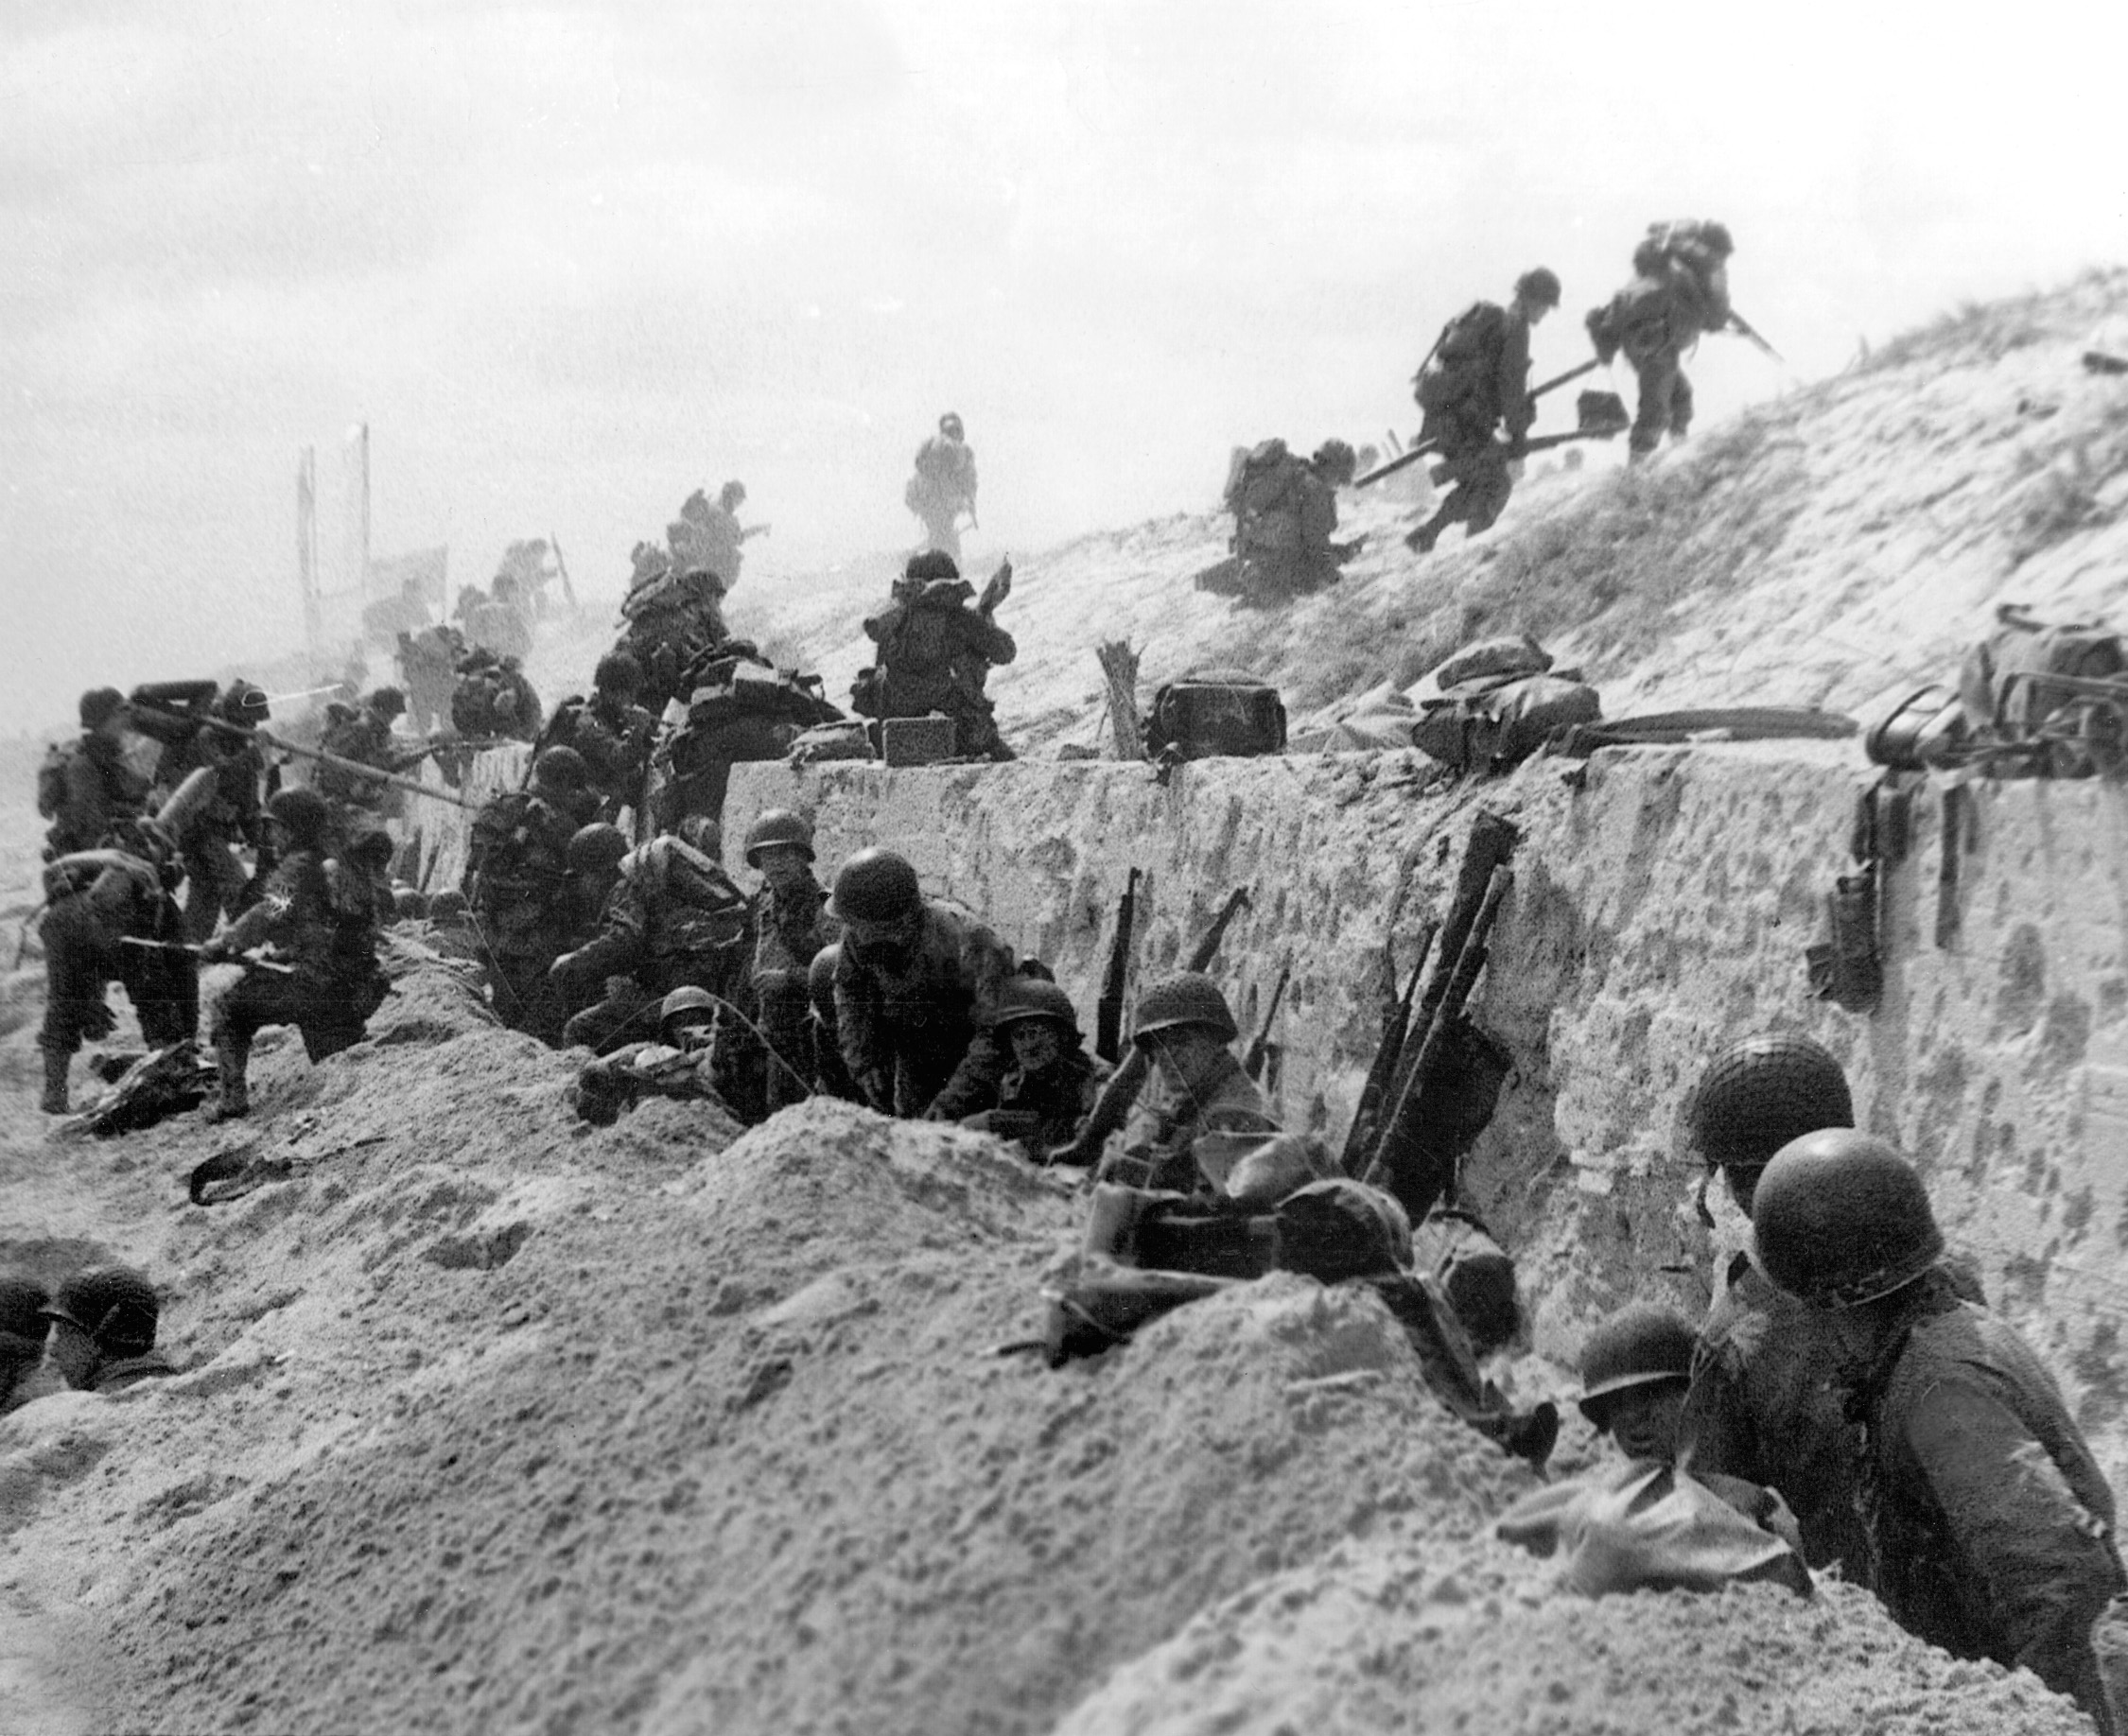 After consolidating their positions on Utah Beach and catching their breaths behind the cover of a stone wall, U.S. troops begin the long trek inland on the morning of D-day.